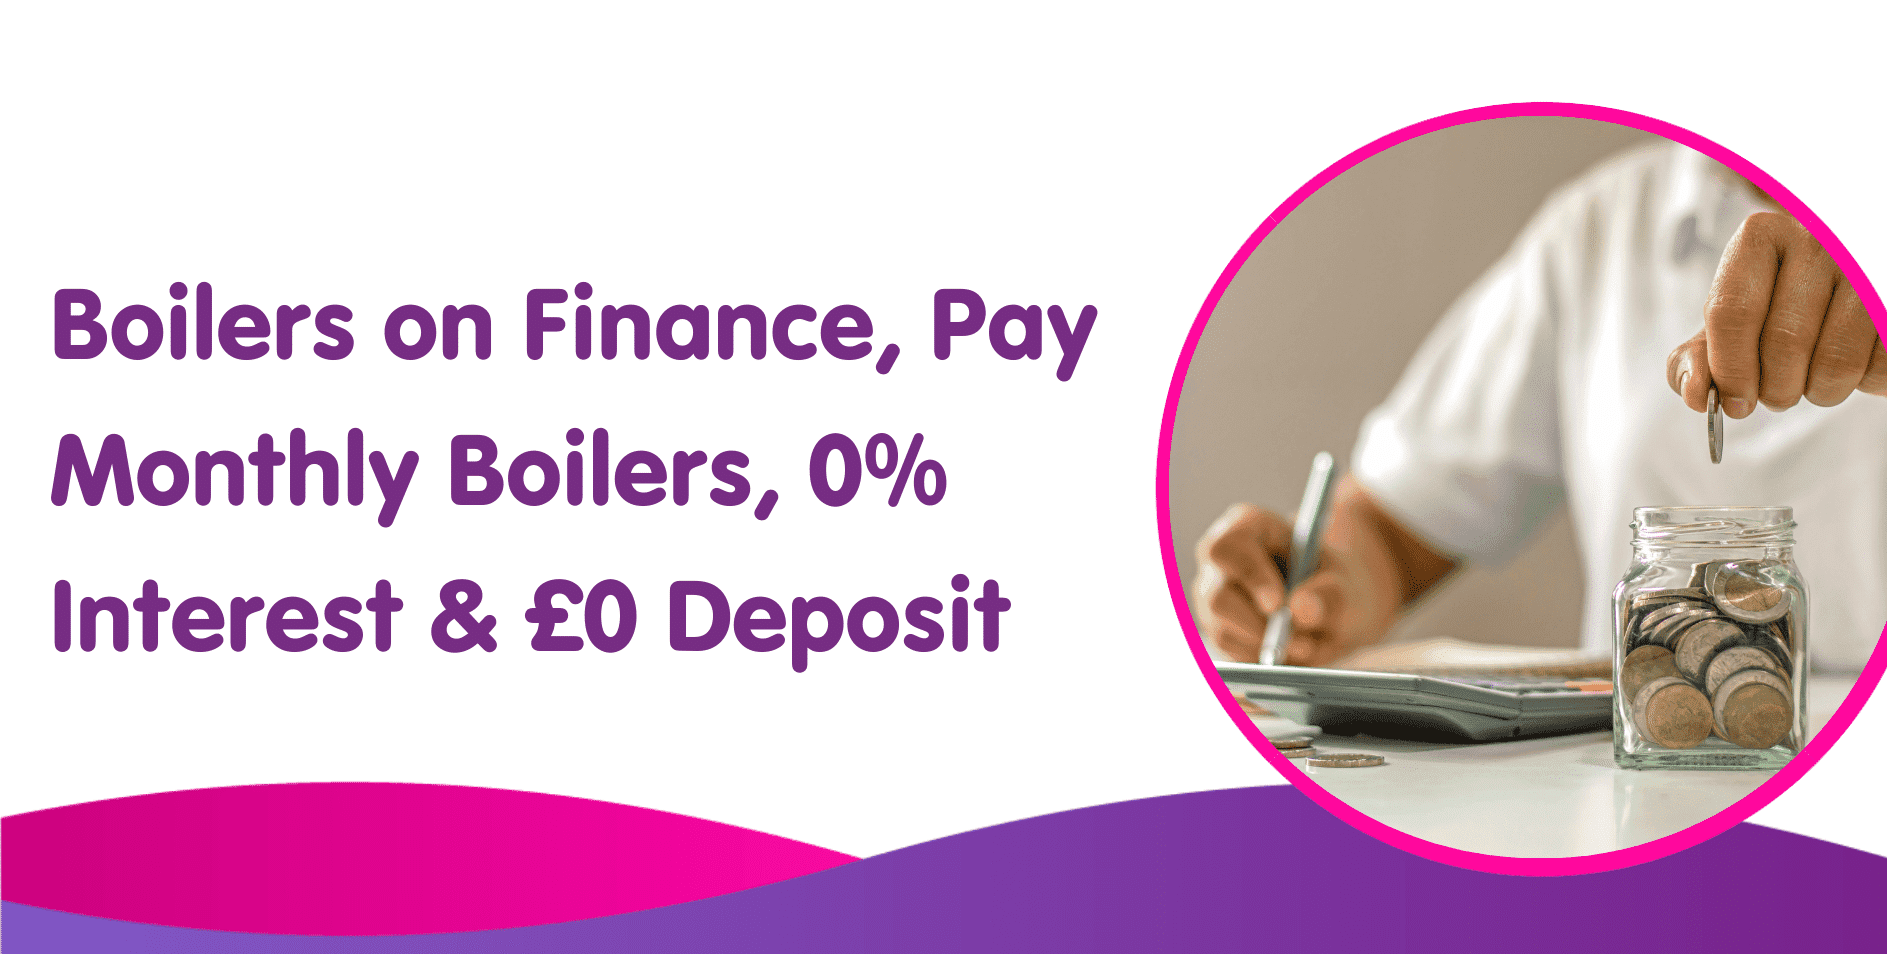 Boilers on Finance - Pay Monthly, 0% Interest & £0 Deposit